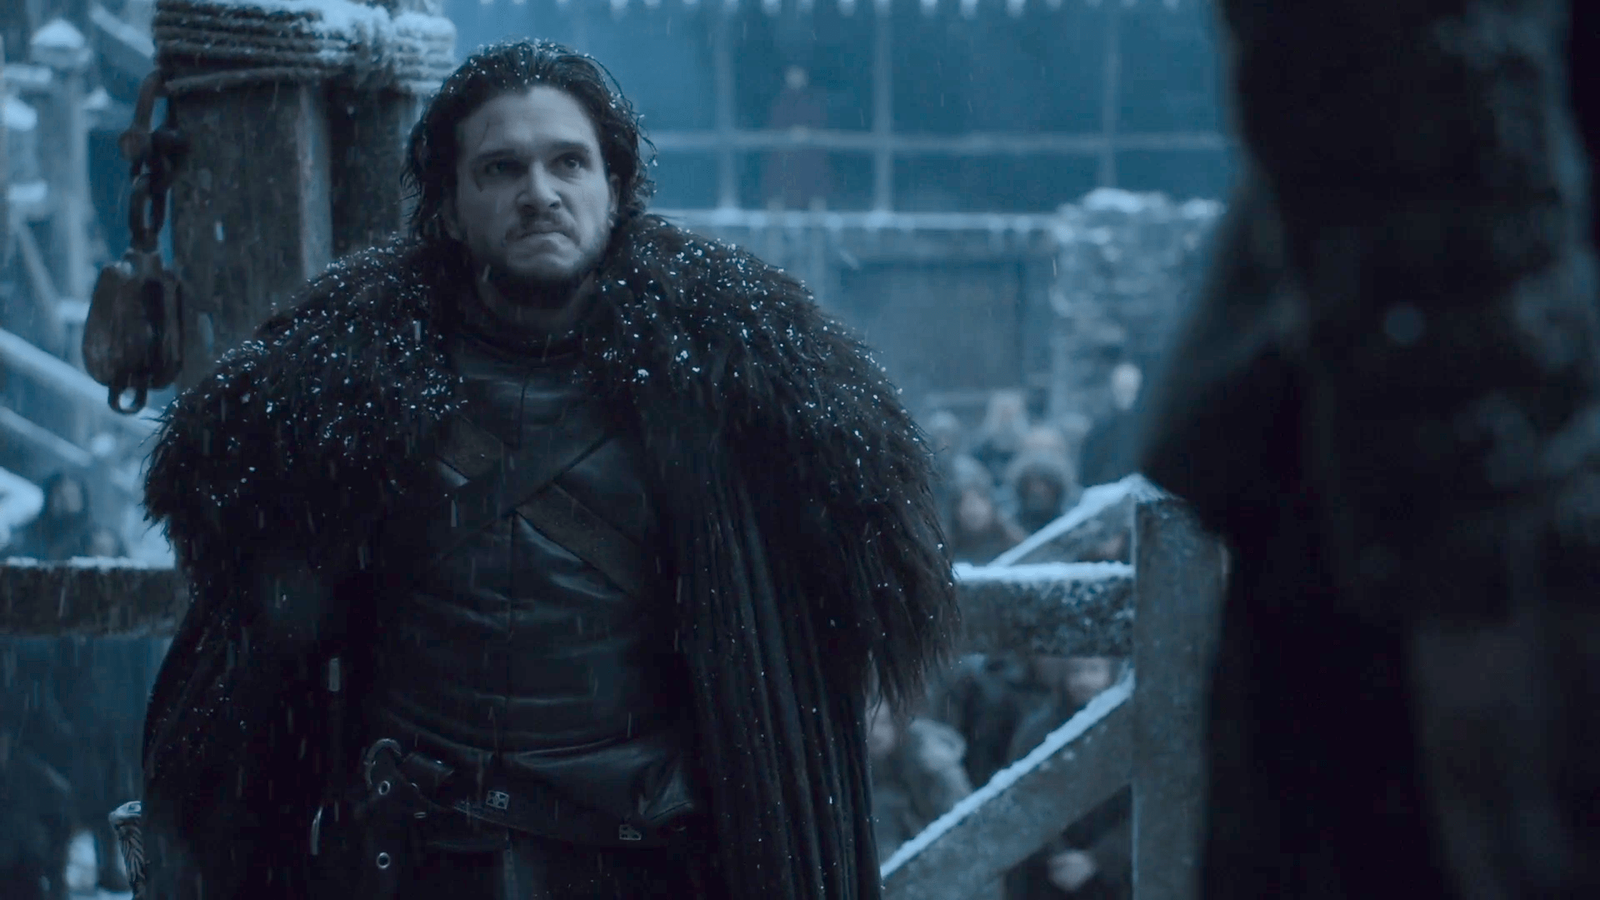 Kit Harington, who played Jon Snow in the Game of Thrones, sent critics of the eighth season three letters - Game of Thrones, Kit Harington, Jon Snow, He knows everything, 